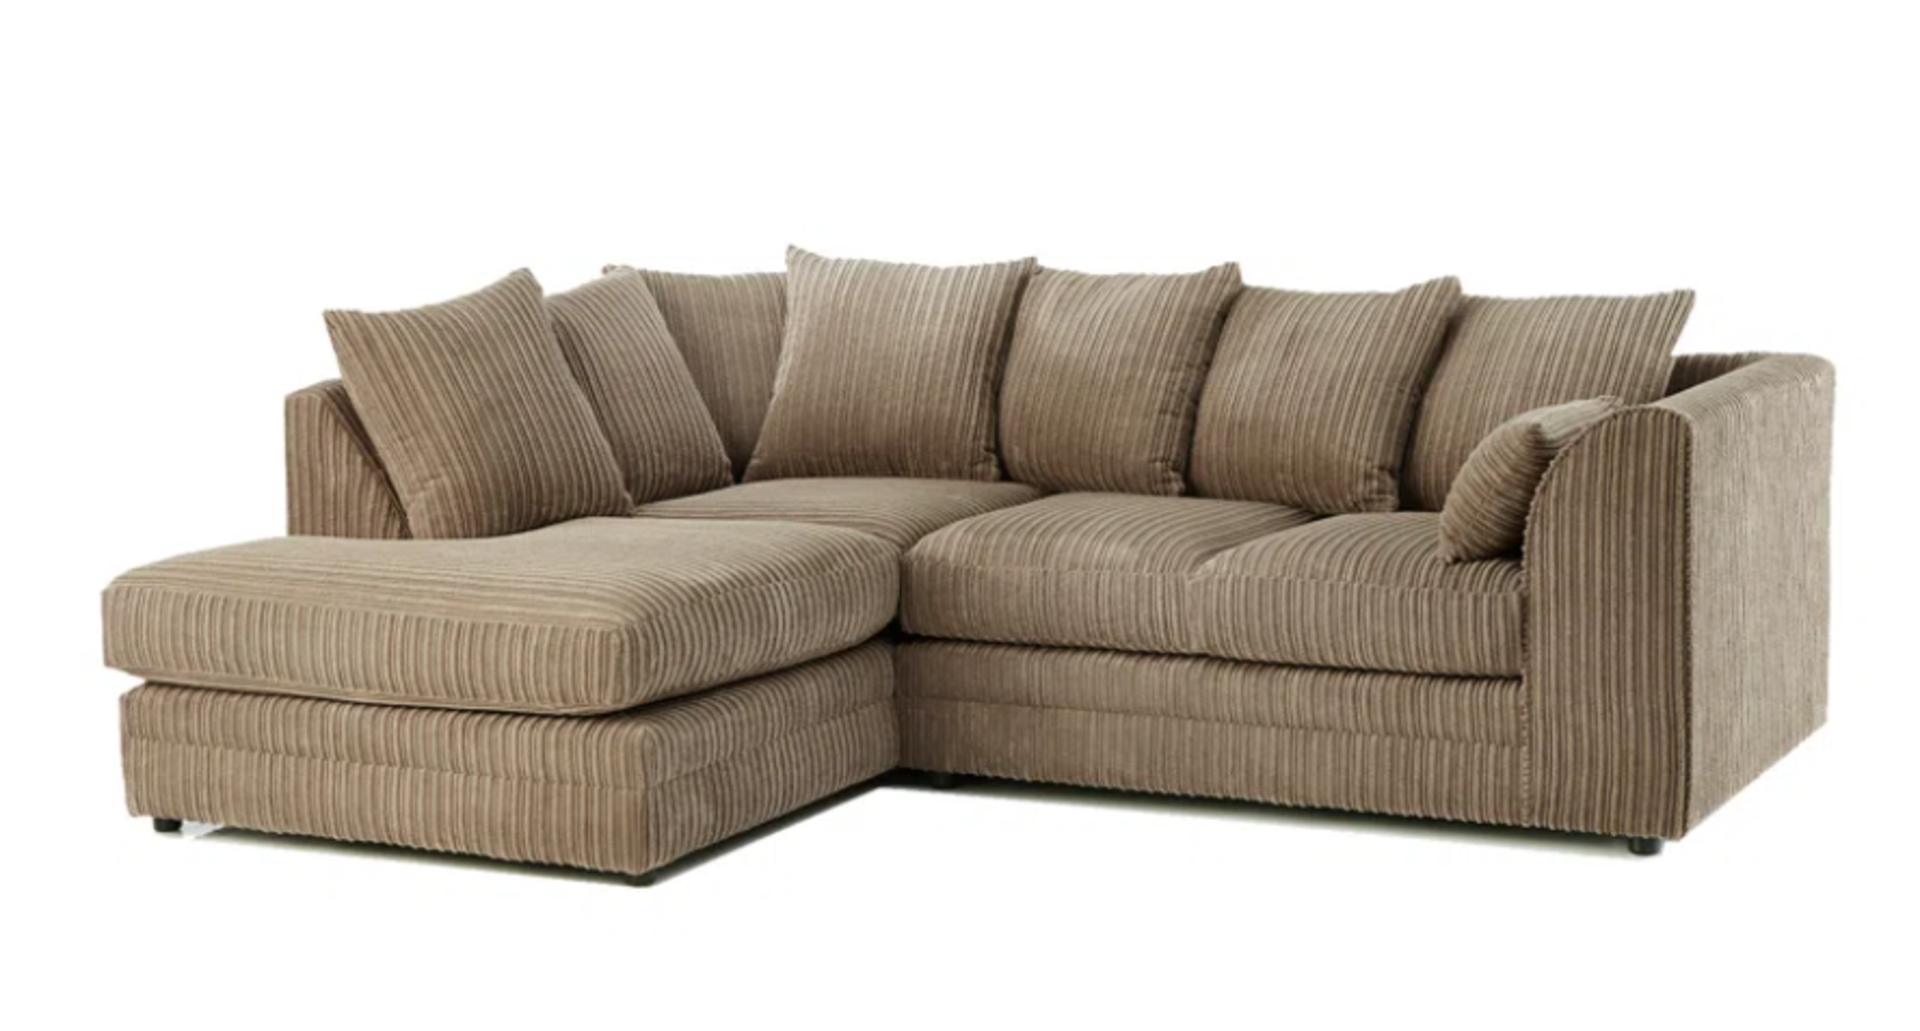 Ebern Designs Duvernay 2 - Piece Upholstered Corner Sofa. RRP £999.99. Boasts luxury in its name,